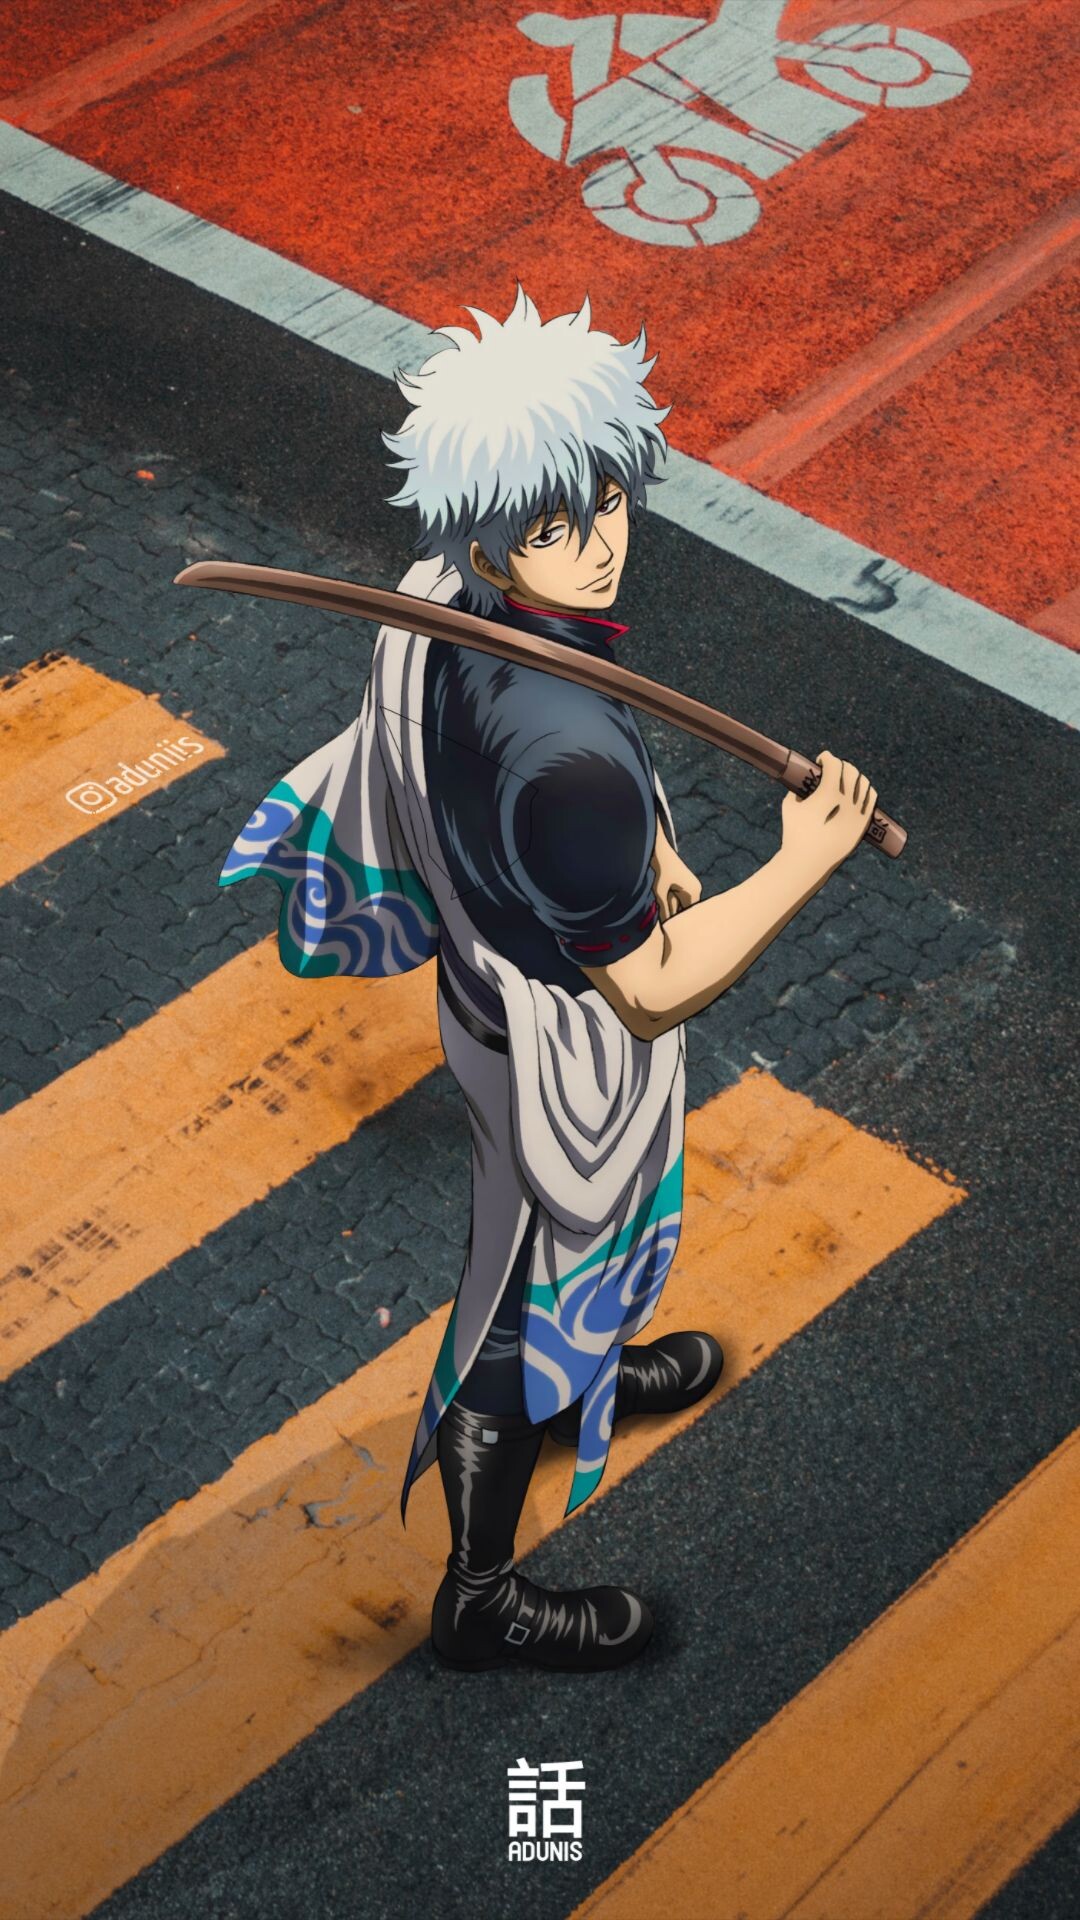 Gintoki Sakata: Gintama warrior with a sword, A veteran in the Joui War with a range of  fighting abilities. 1080x1920 Full HD Wallpaper.